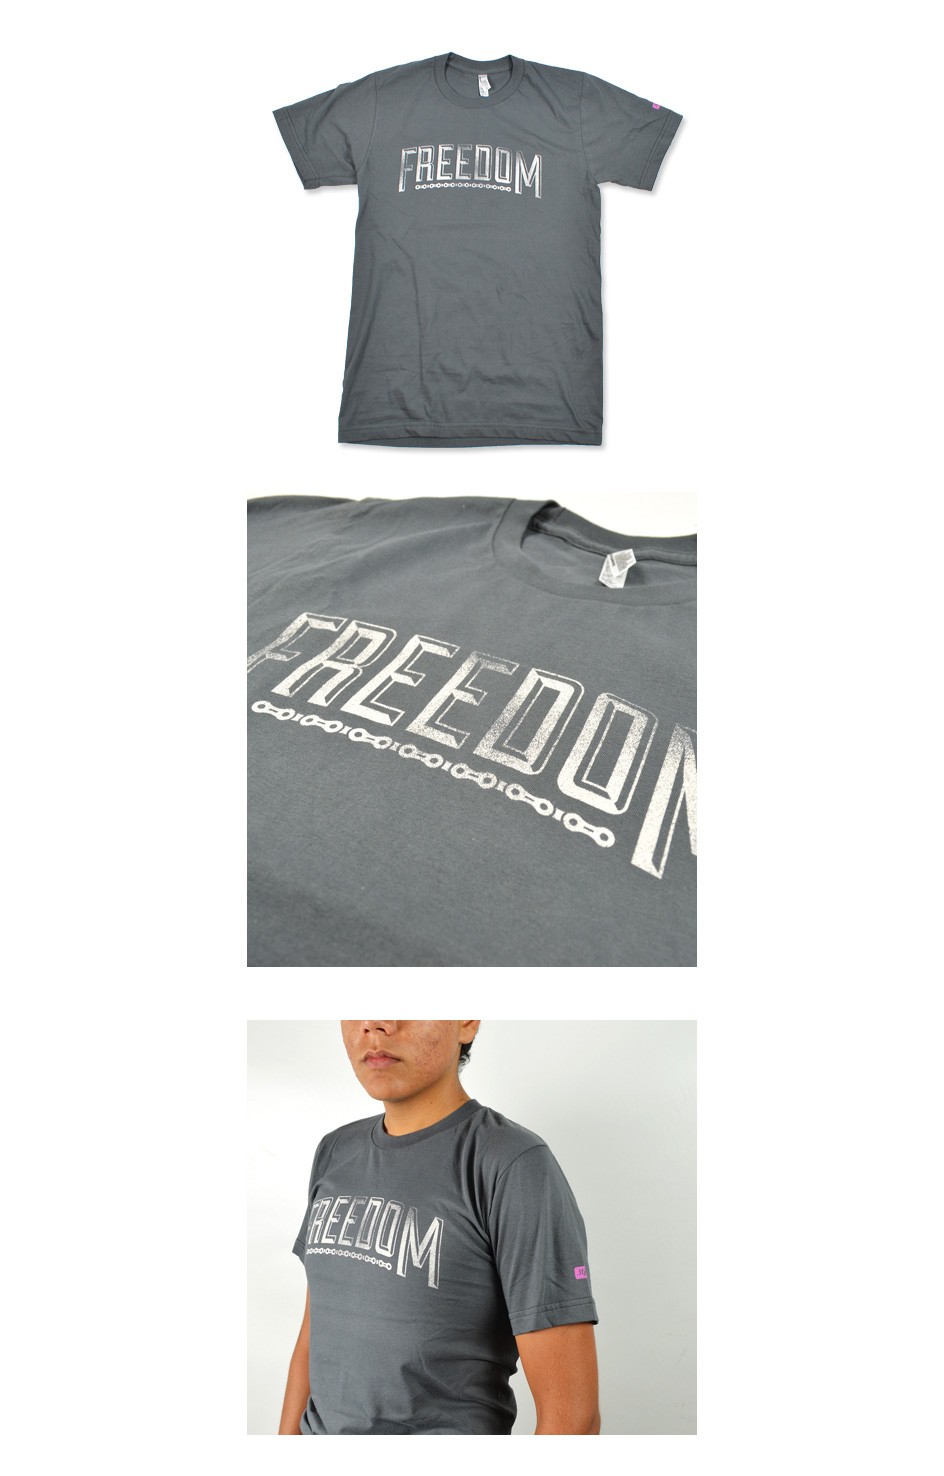 Mellow Johnny's Limited Edition Freedom T-Shirt